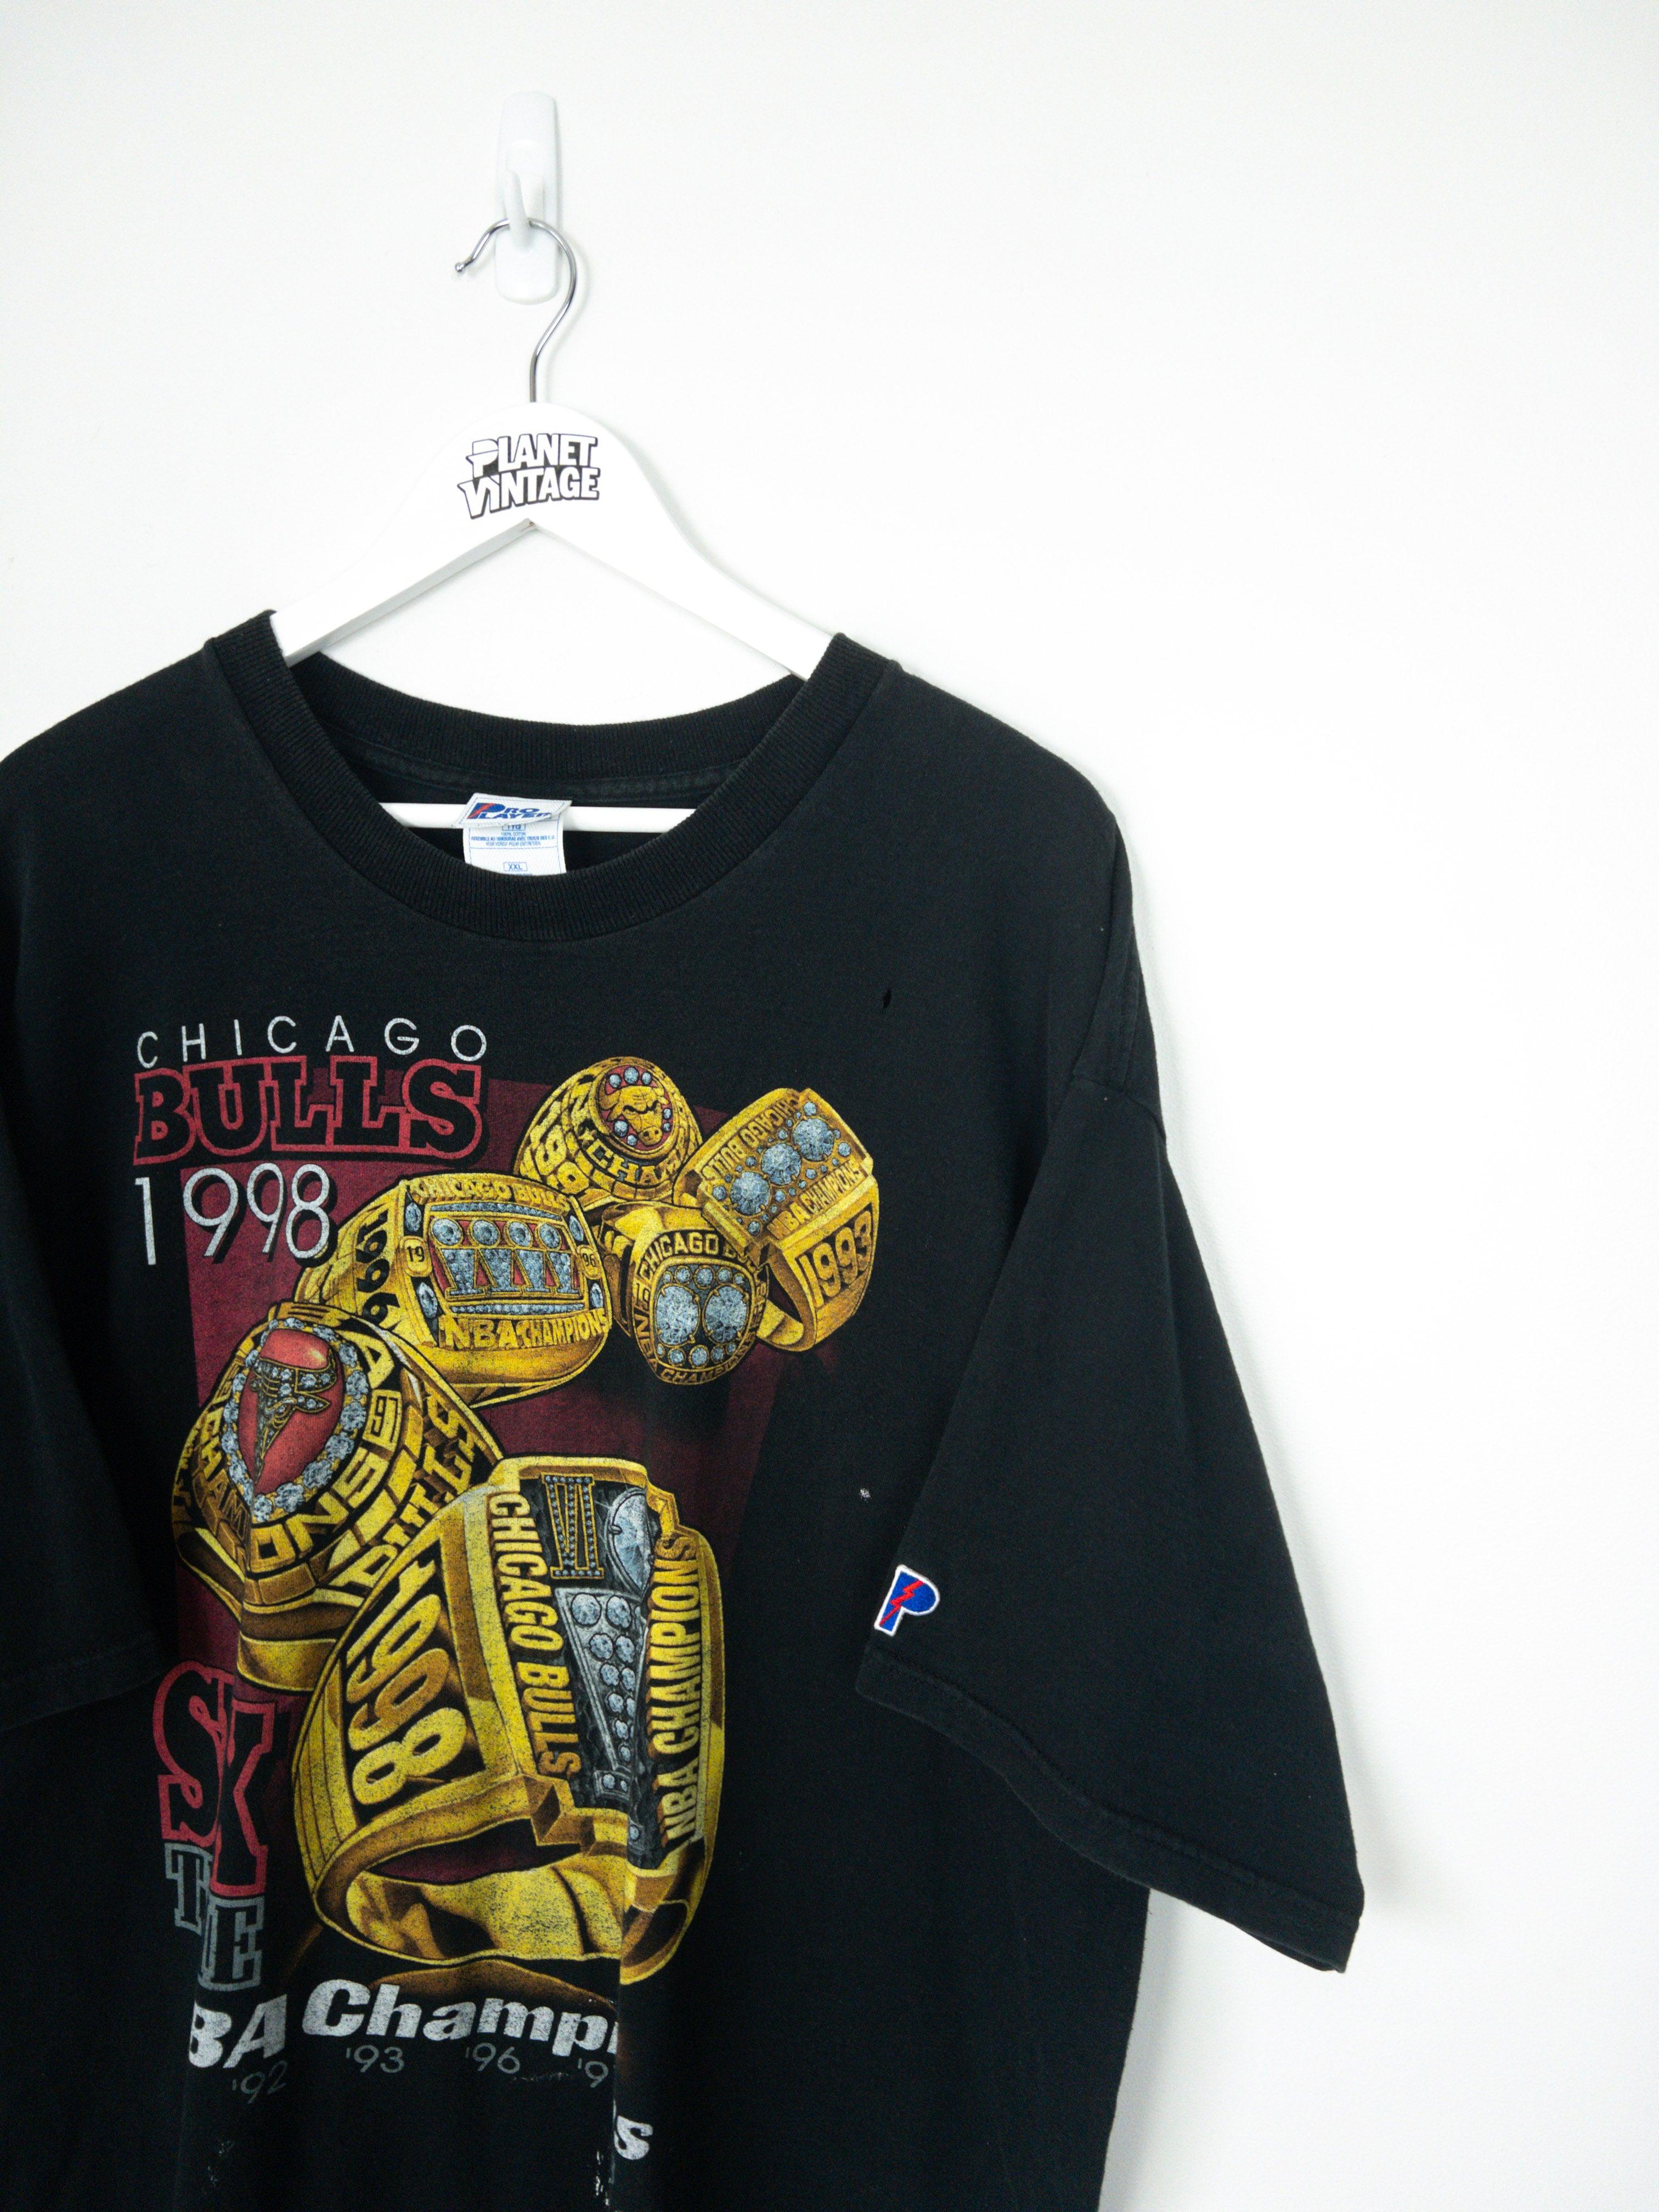 Chicago Bulls Champs 1998 Tee (XXL) - Planet Vintage Store